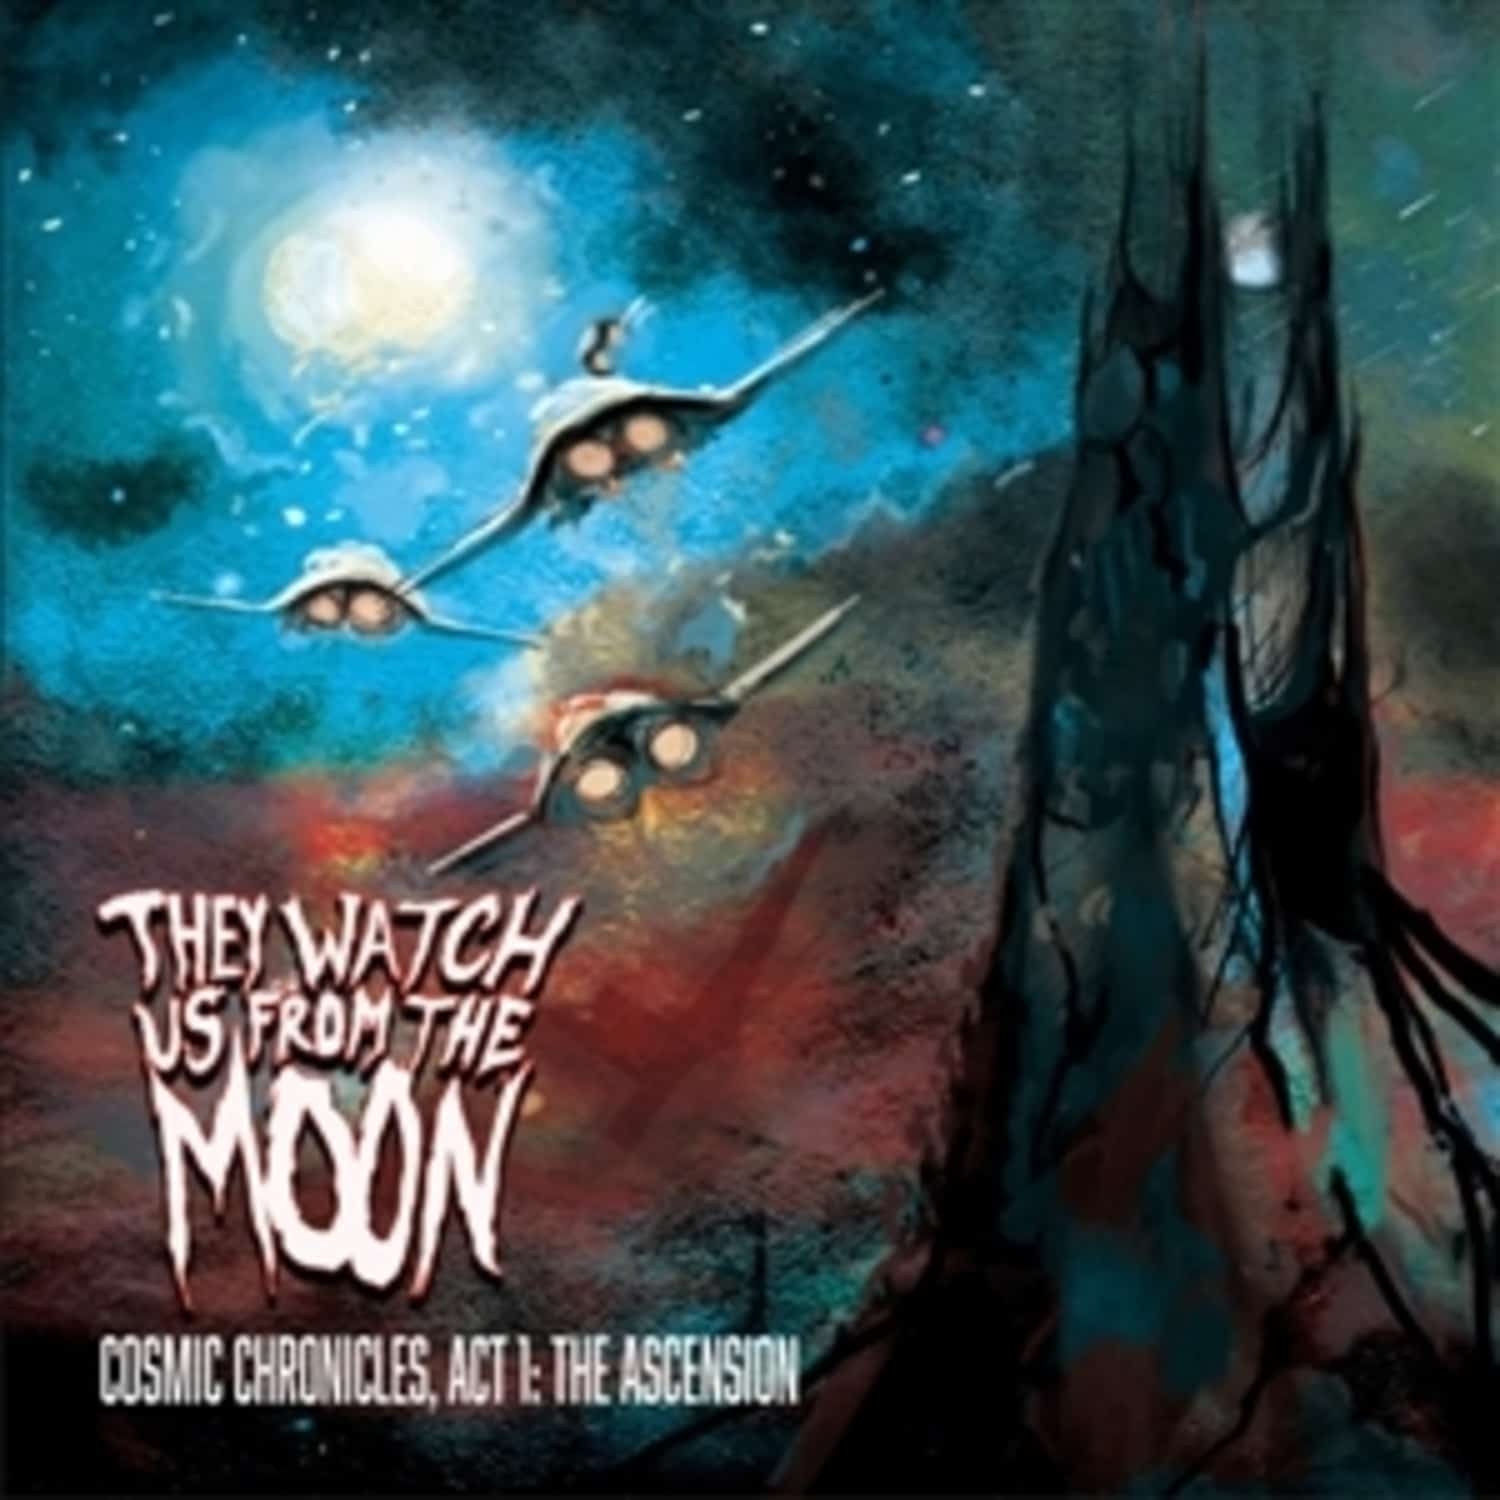 They Watch Us From The Moon - COSMIC CHRONICLE: ACT 1, THE ASCENSION 